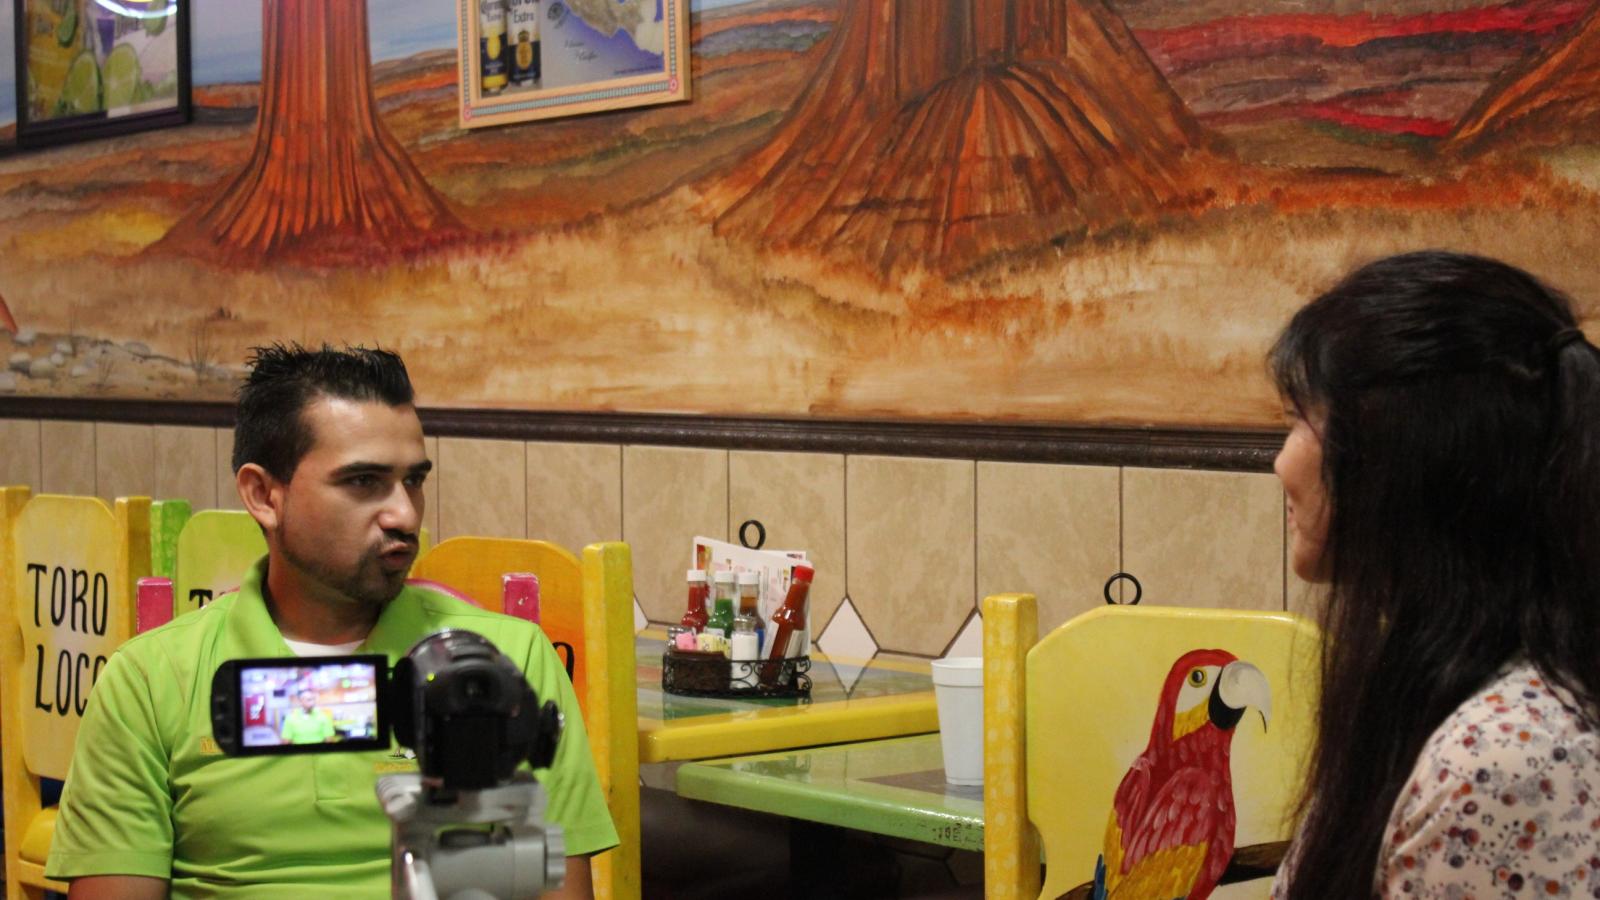 Mario during his interview in his restaurant